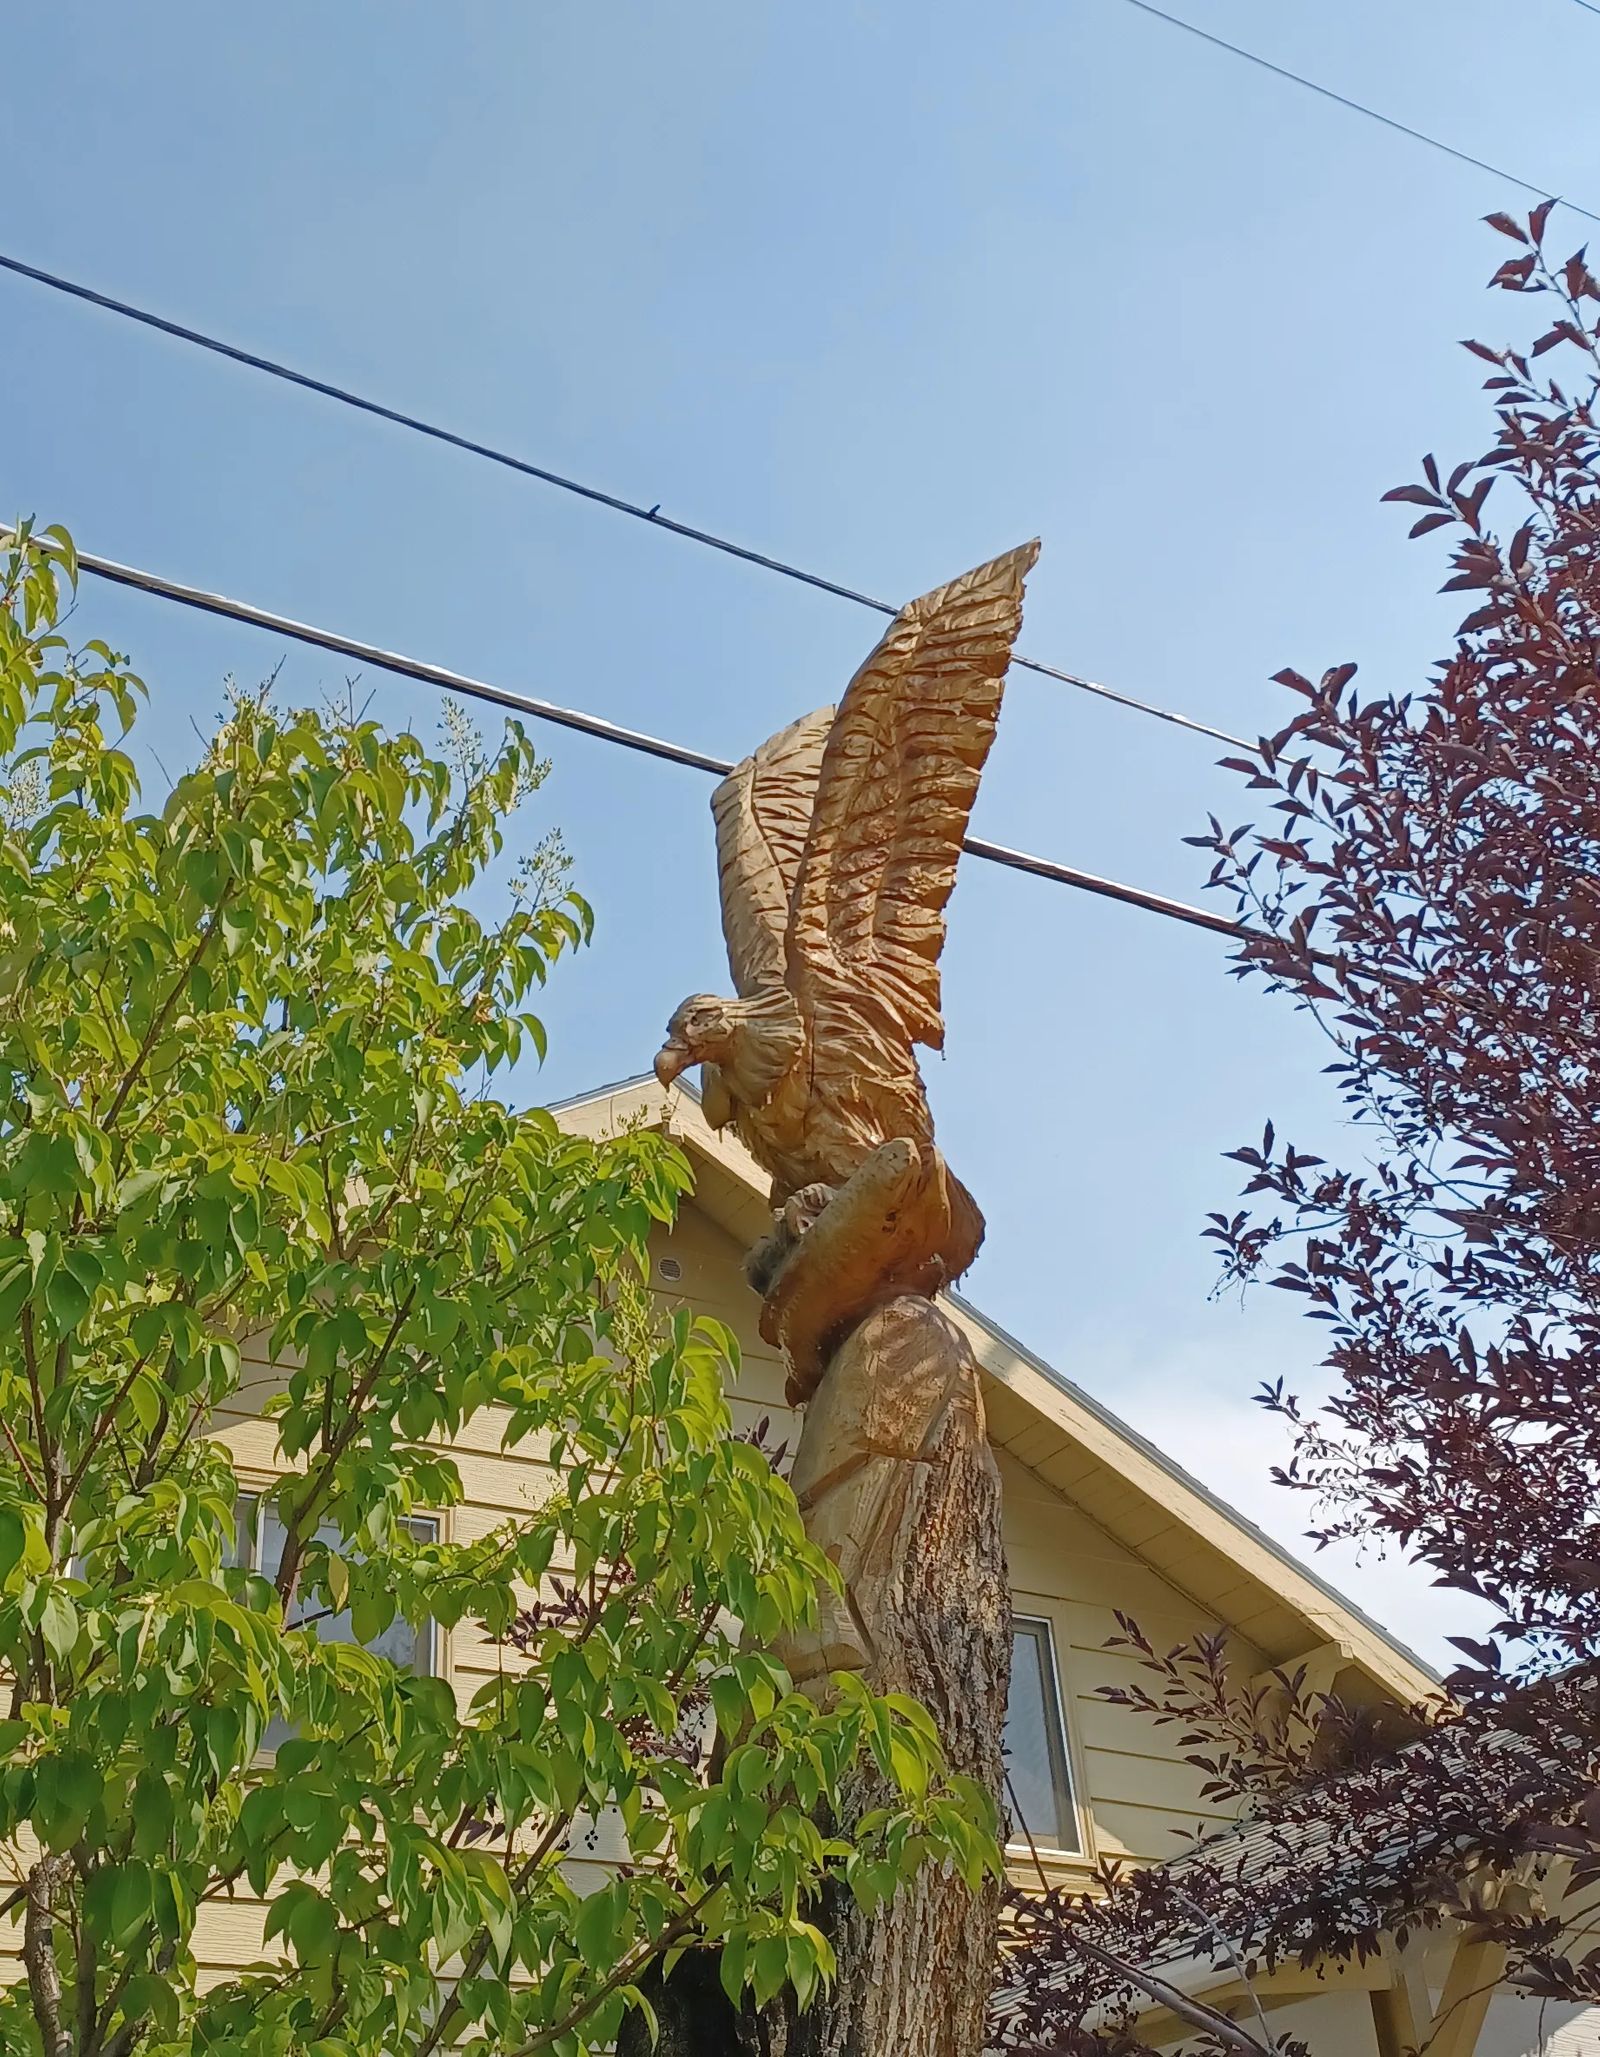 Photo of an eagle with fish, carved into a tree in Anaconda, Montana